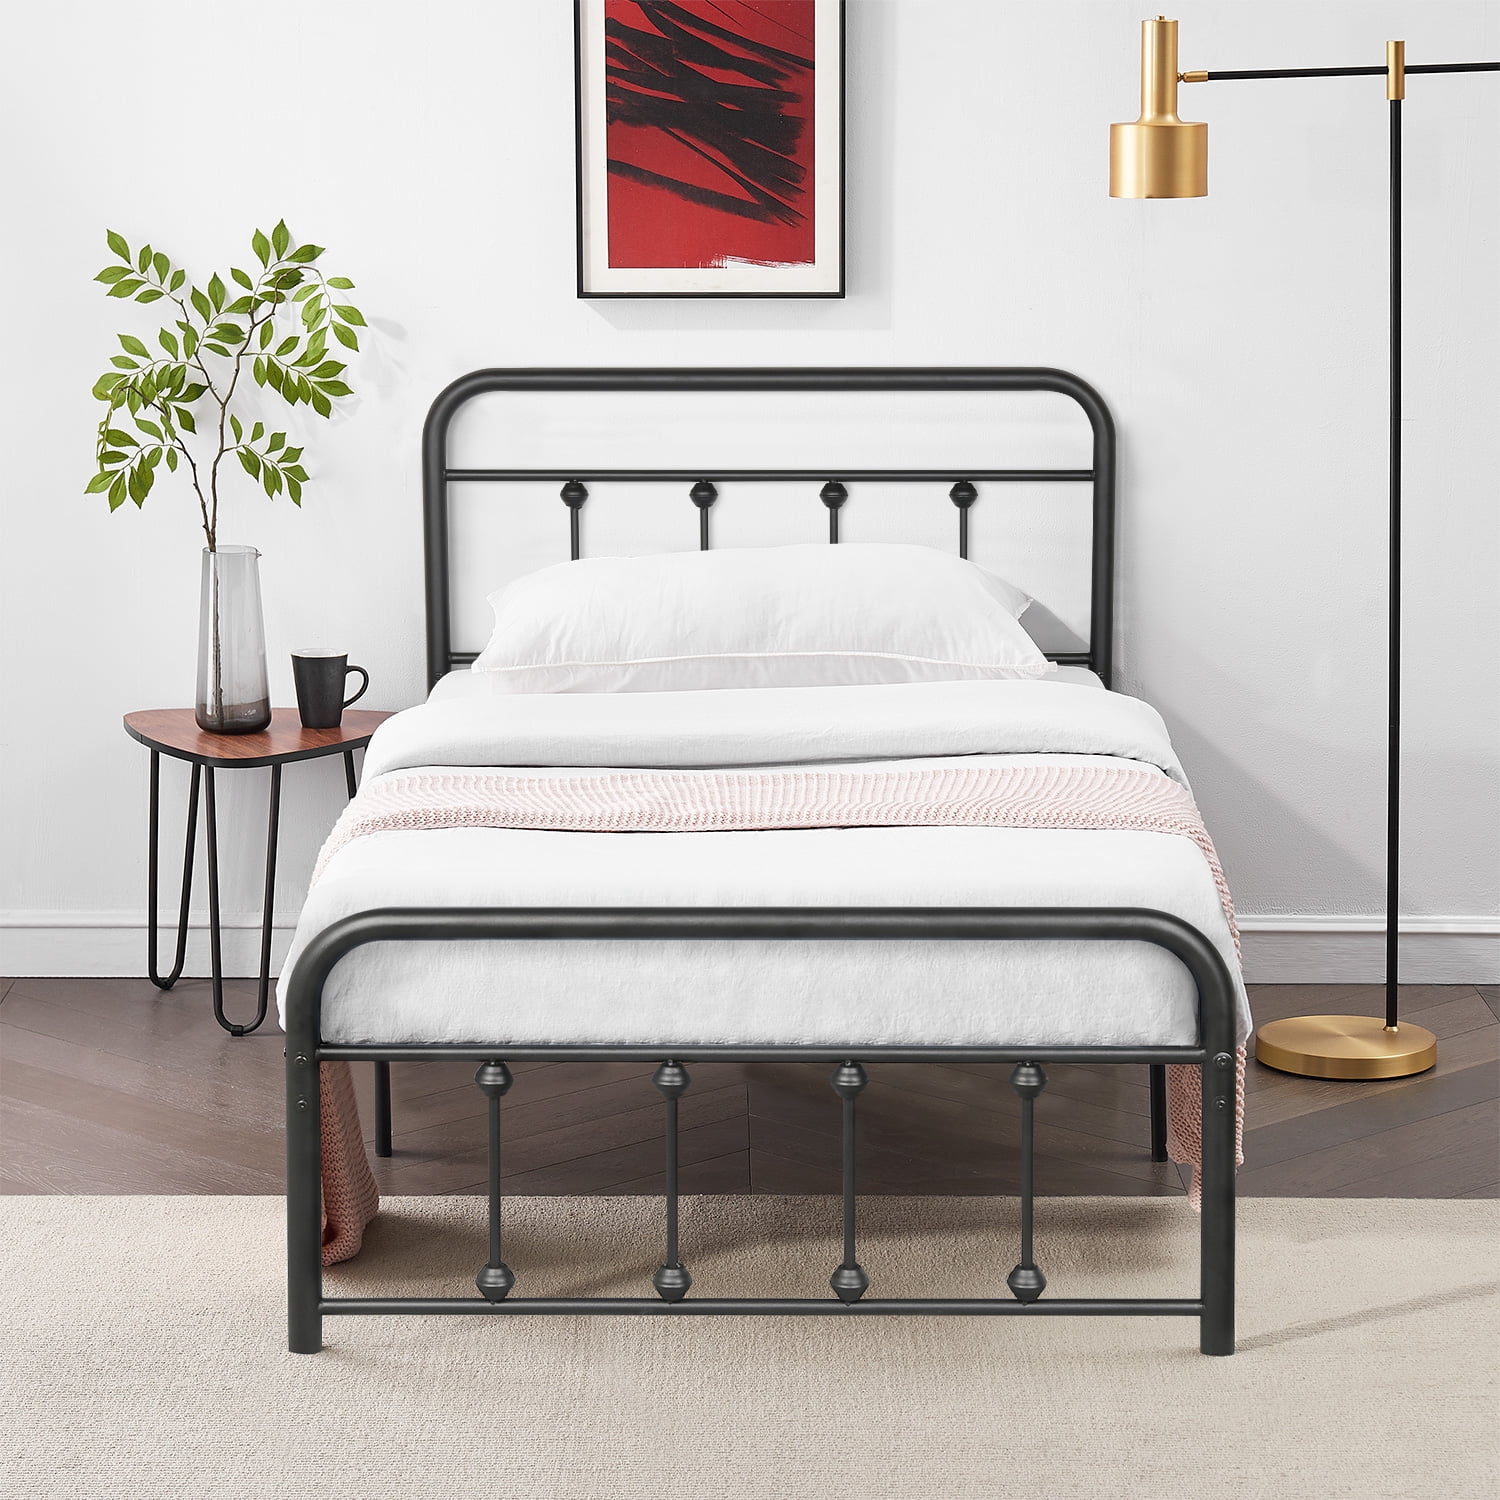 Vecelo Twin Size Metal Platform Bed Frame With Headboard And Footboard